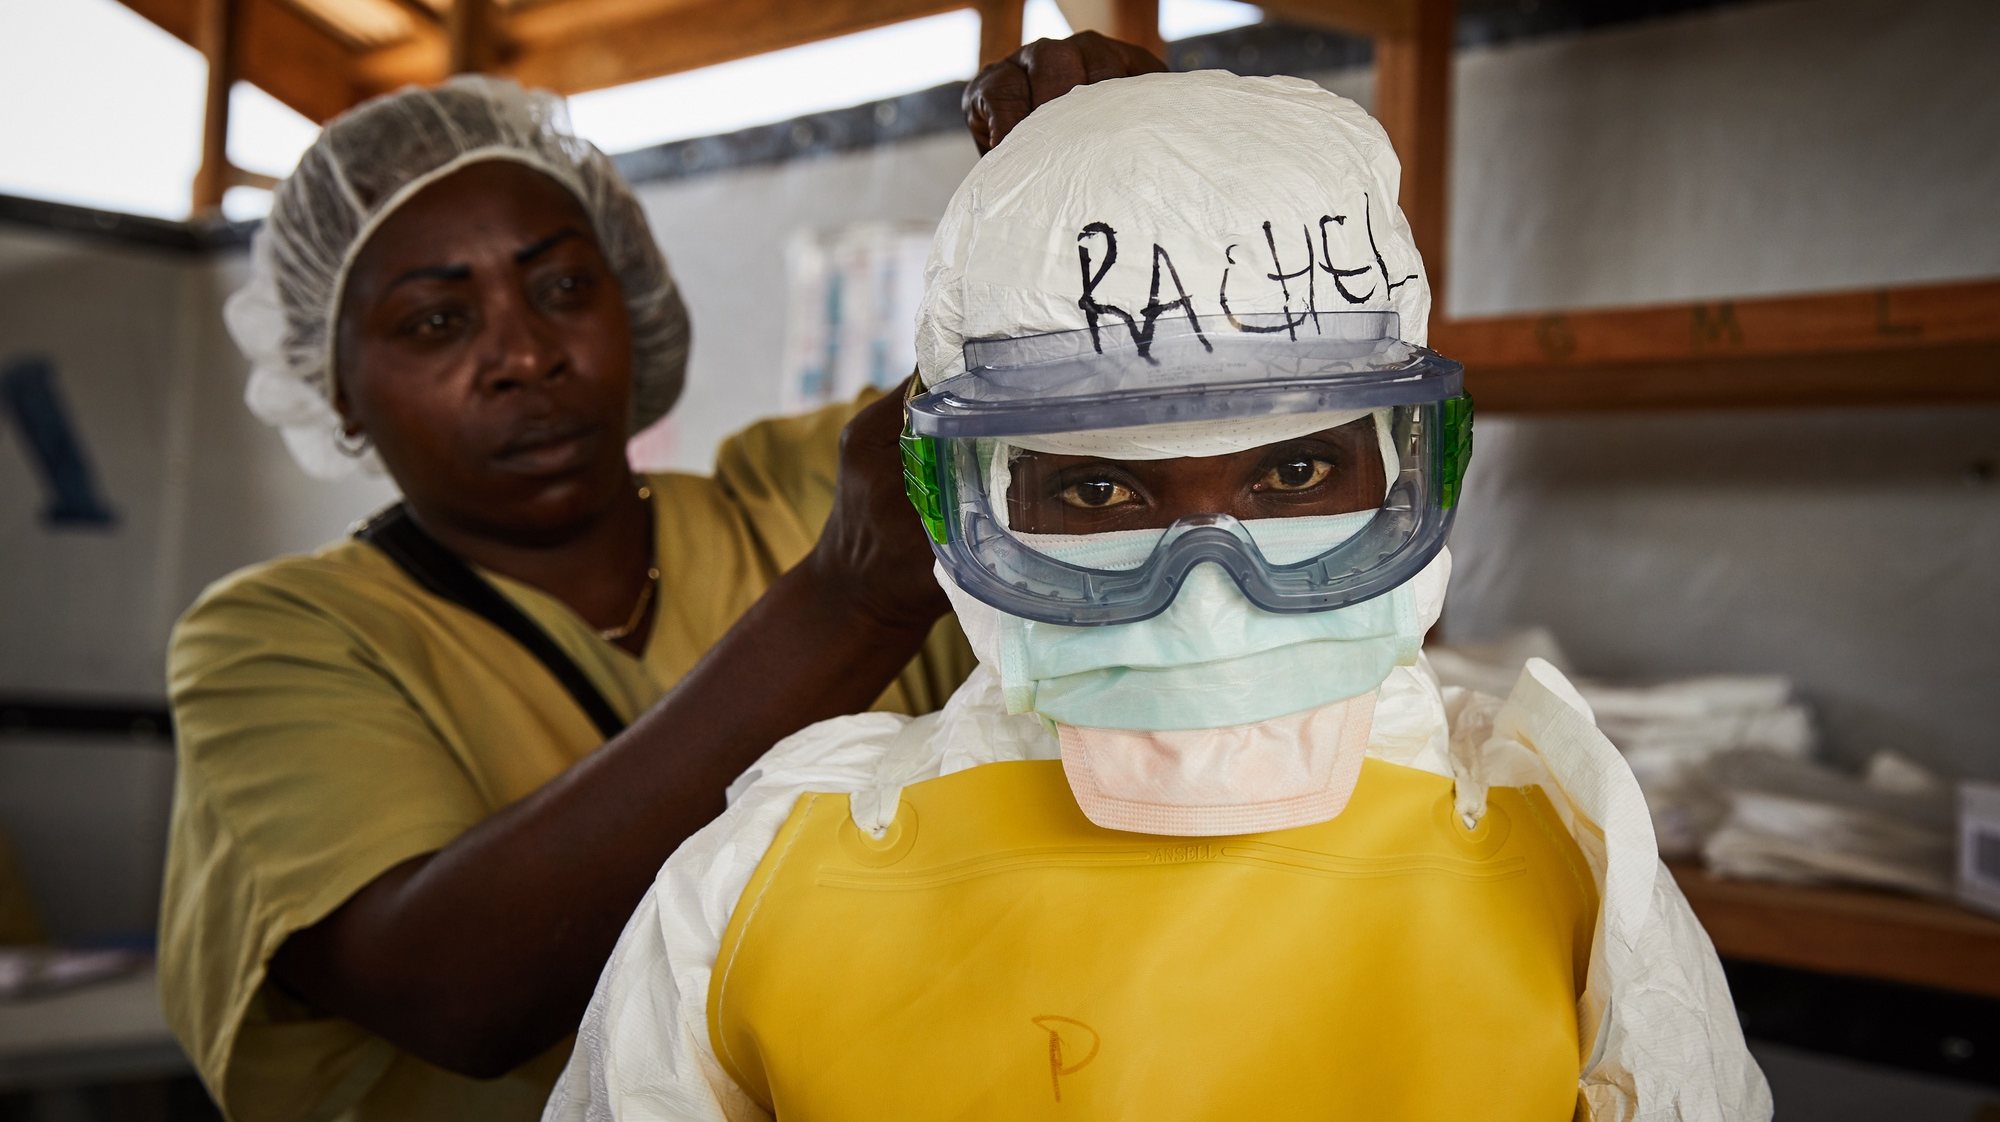 epa08891329 (20/39) Rachel Rukwati suits up in PPE to enter a high-risk treatment zone, at the peak of the Ebola crisis, at a health centre in Beni, North Kivu, Democratic Republic of Congo, 04 May 2019. Rachel was a health worker attached to the Ebola response and has first-hand experience of combating an unfamiliar virus. &#039;In the Ebola response I was a nurse, I took care of ill people, confirmed, and unconfirmed cases when they were at the CTE.In fact, the time we were entering the high-risk zone, we used to get fear, that fear was pushing us to leave the high-risk zone quickly. And when we wore the PPE costume or the protected material we were feeling muffled, then when you leave, you felt at ease because you return to your familiar feeling, compared to how you just felt breathing. The fear I had, was that I could get contaminated as a nurse. When I went to treatment zones I had fear.Since I left the response, I feel that I haven’t recovered my health as it was before… the feeling we used to get in the treatment centers, we sense there are some things we lost.As coronavirus spreads, to the world, from myself as a health worker from Beni, and the Ebola response; I would tell them that when they notice the virus in their town, they should first accept it like a disease, not like politics, they will not be able to fight it like that. When you react to a disease, you will overcome it, using measures and precautions.&#039; EPA/Hugh Kinsella Cunningham ATTENTION EDITORS / MANDATORY CREDIT : This story was produced in partnership with the Pulitzer Center -- For the full PHOTO ESSAY text please see Advisory Notice epa...